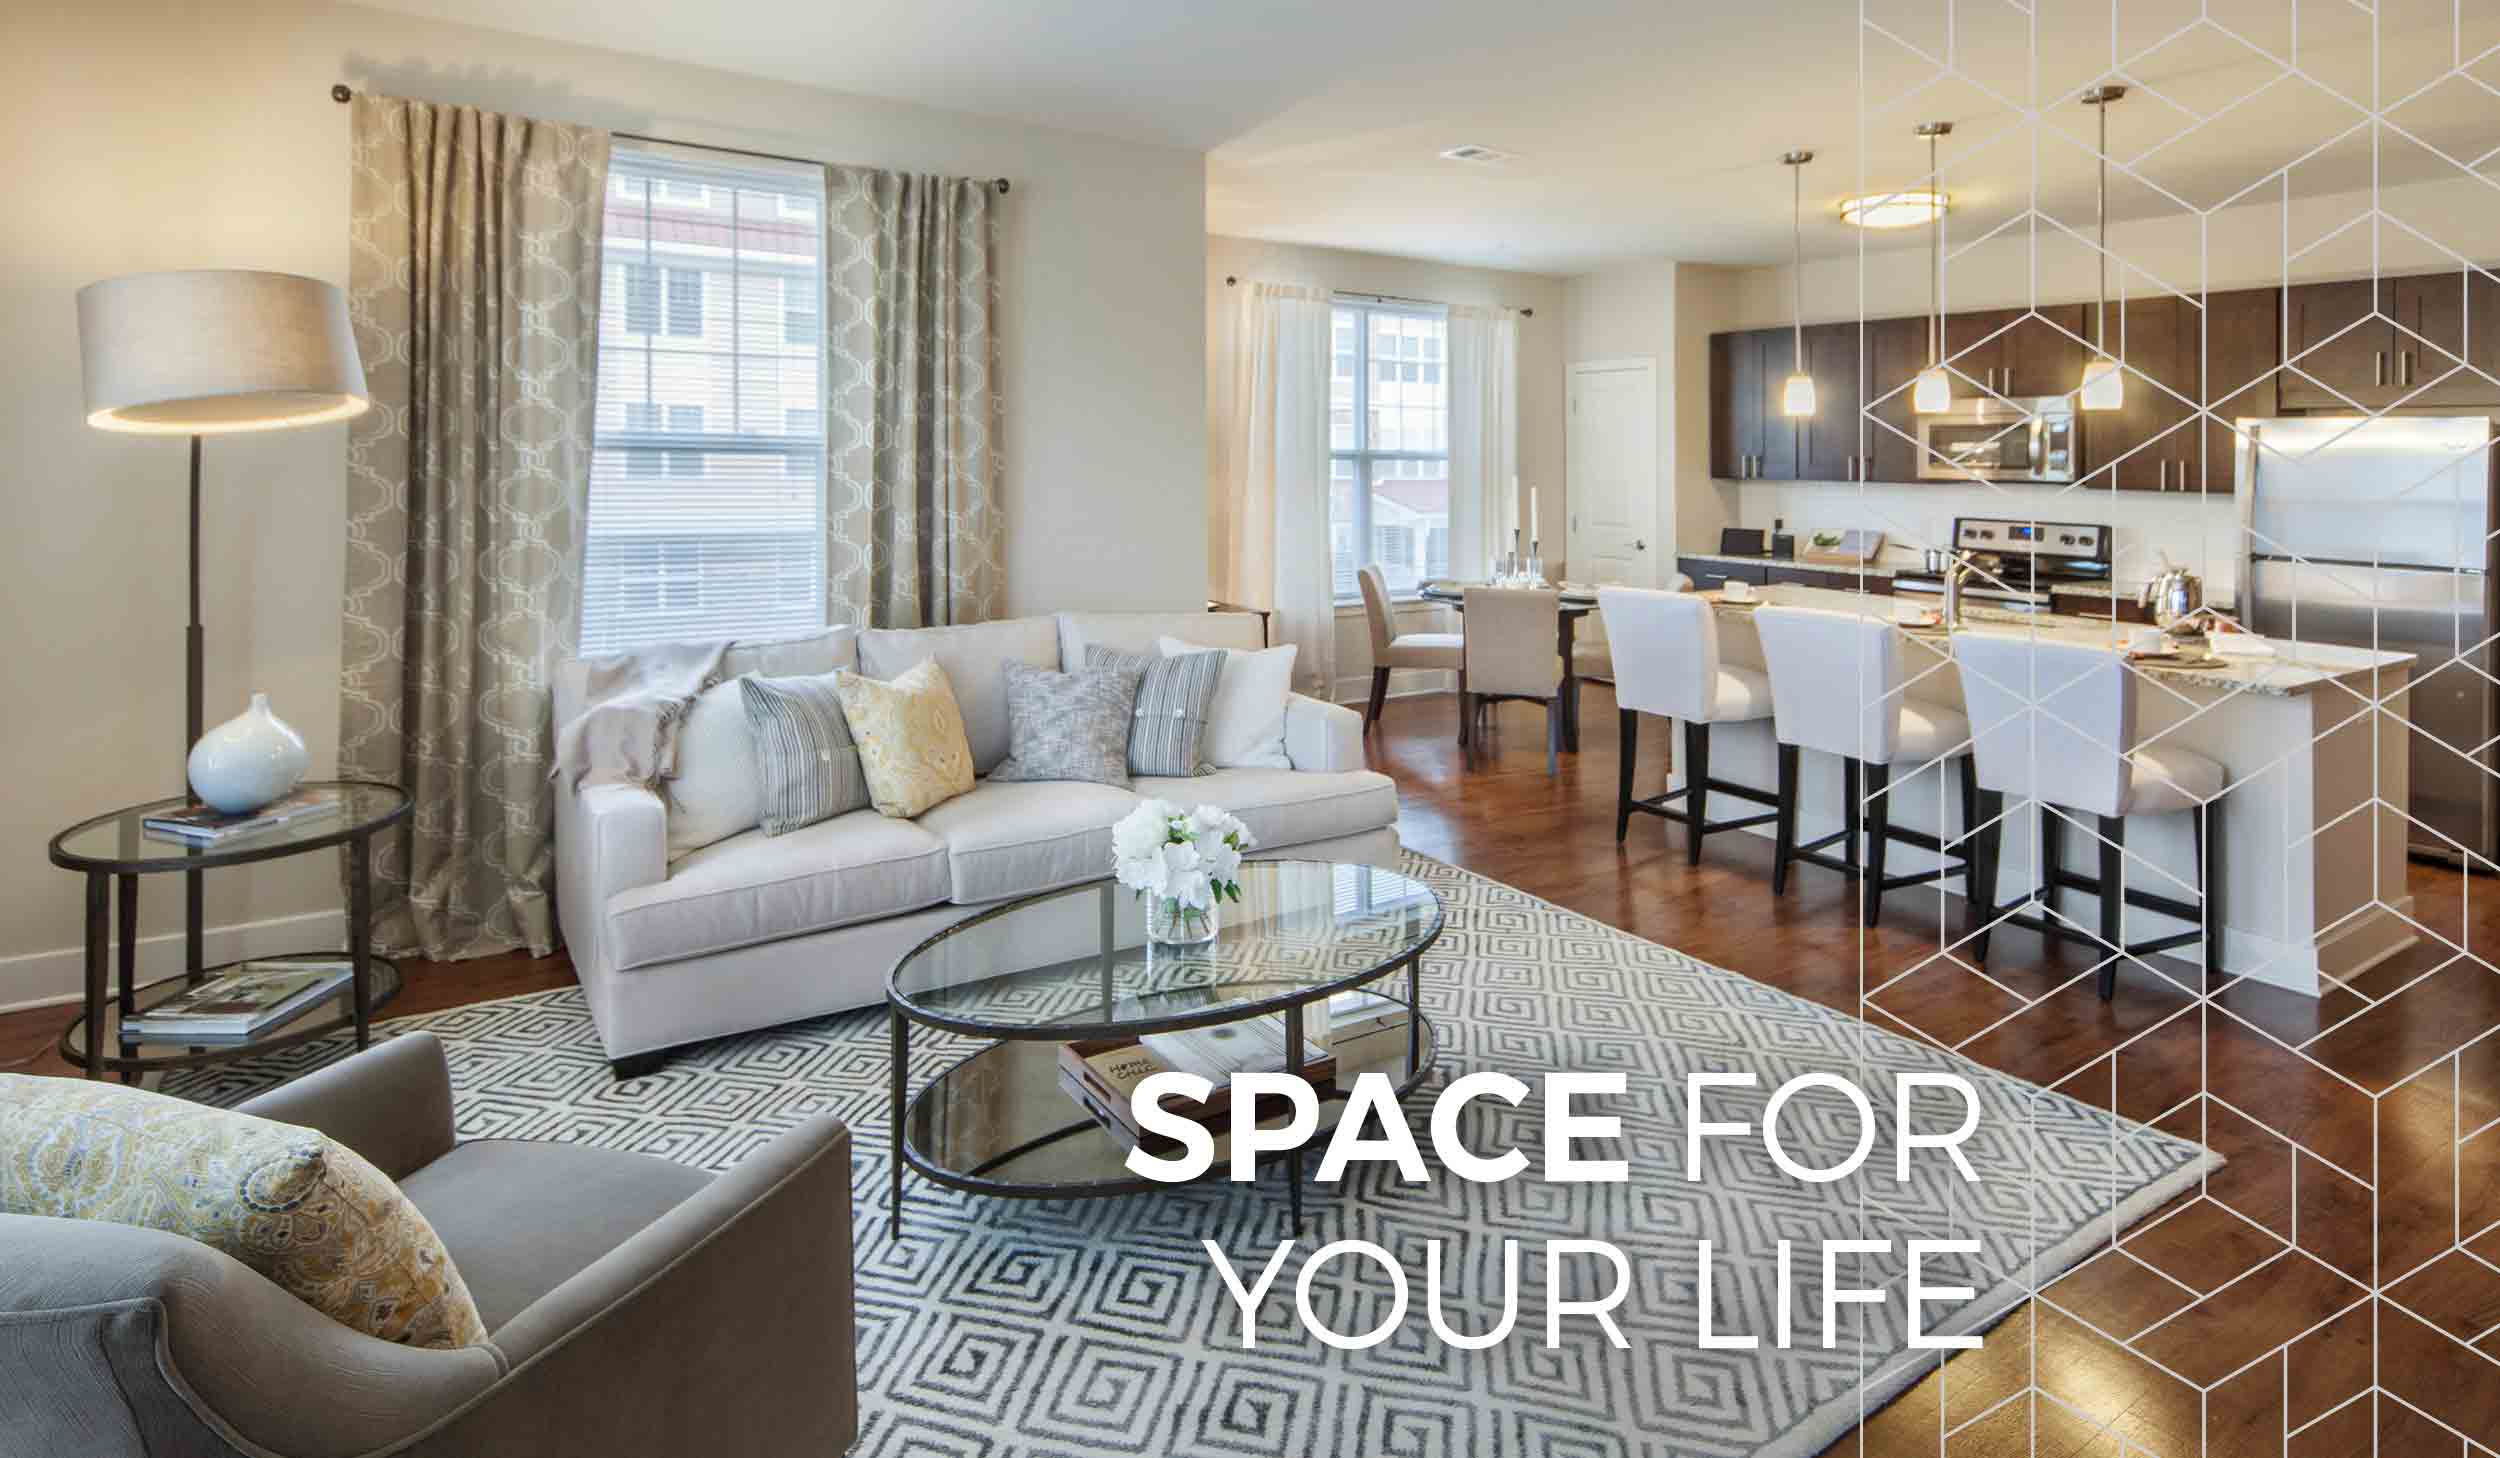 Parc - Space for your life